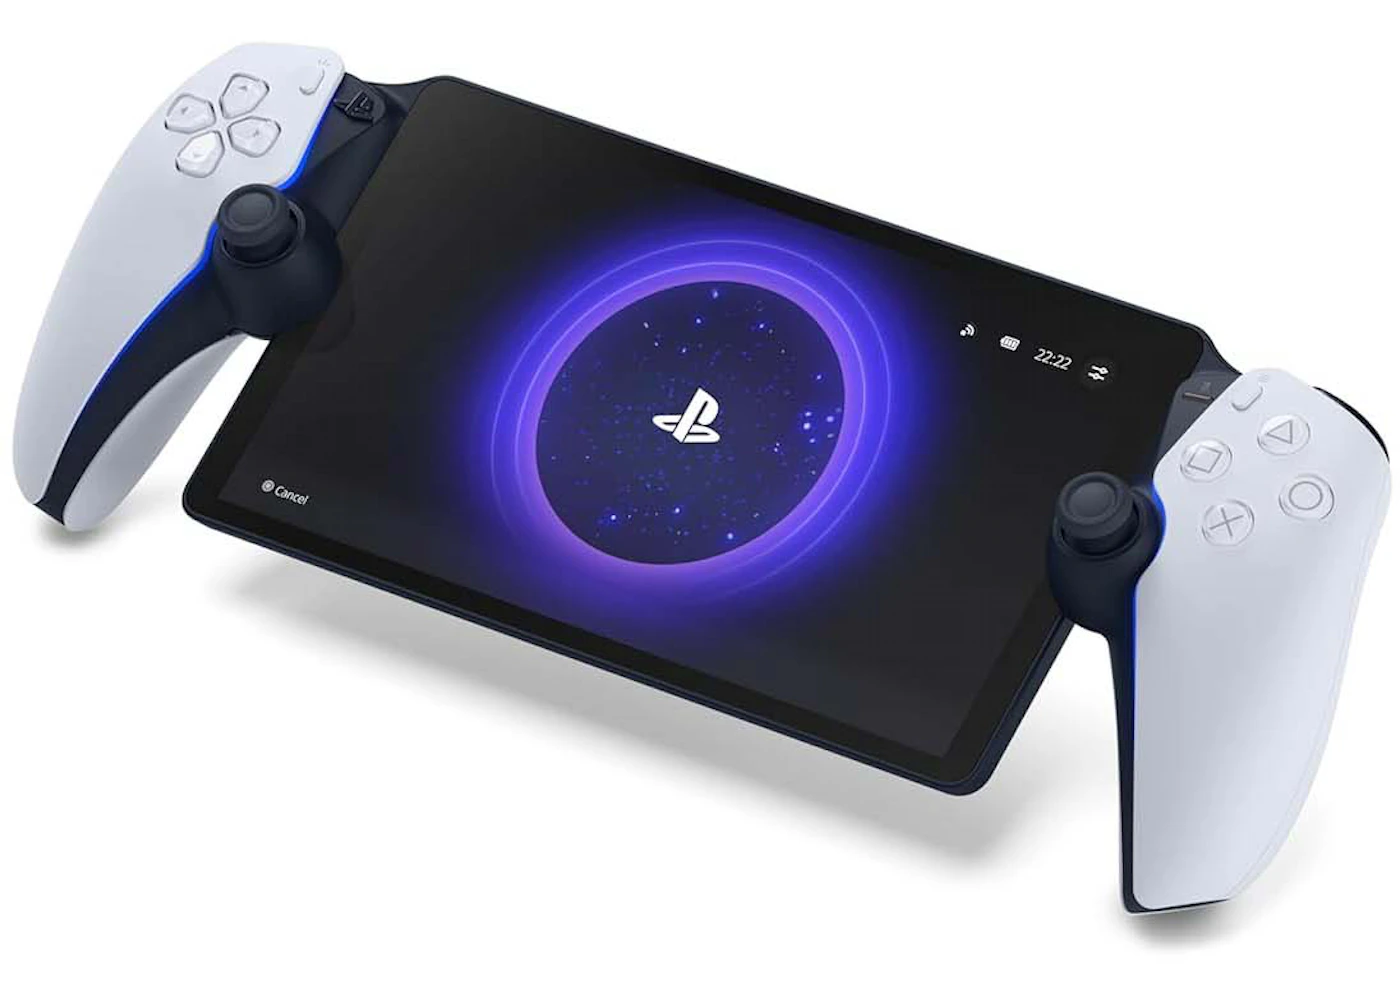 Sony's new Q handheld is official: 8-inch screen, streams PS5